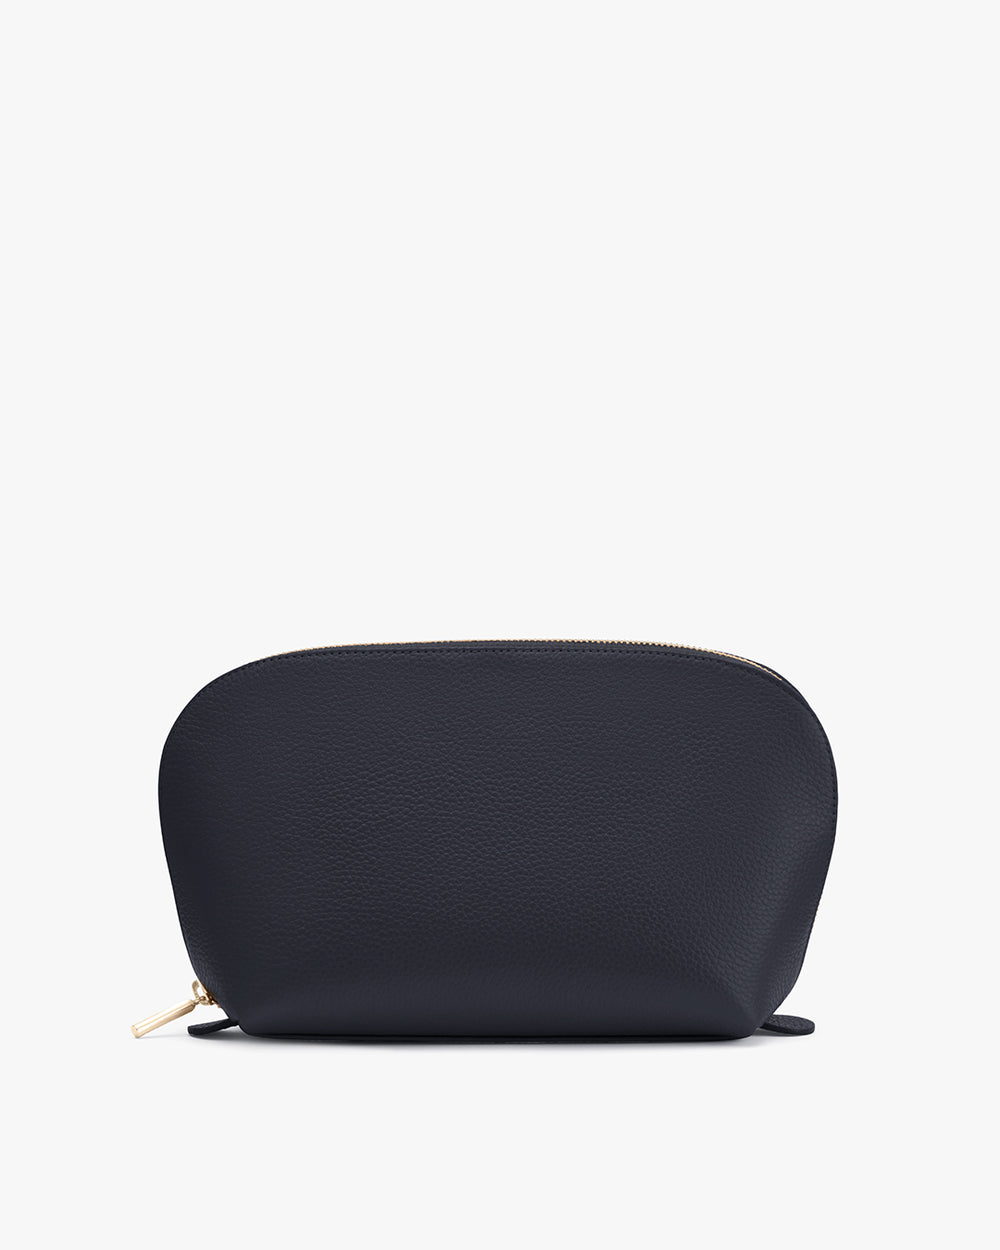 Small pouch with a zipper on a plain background.